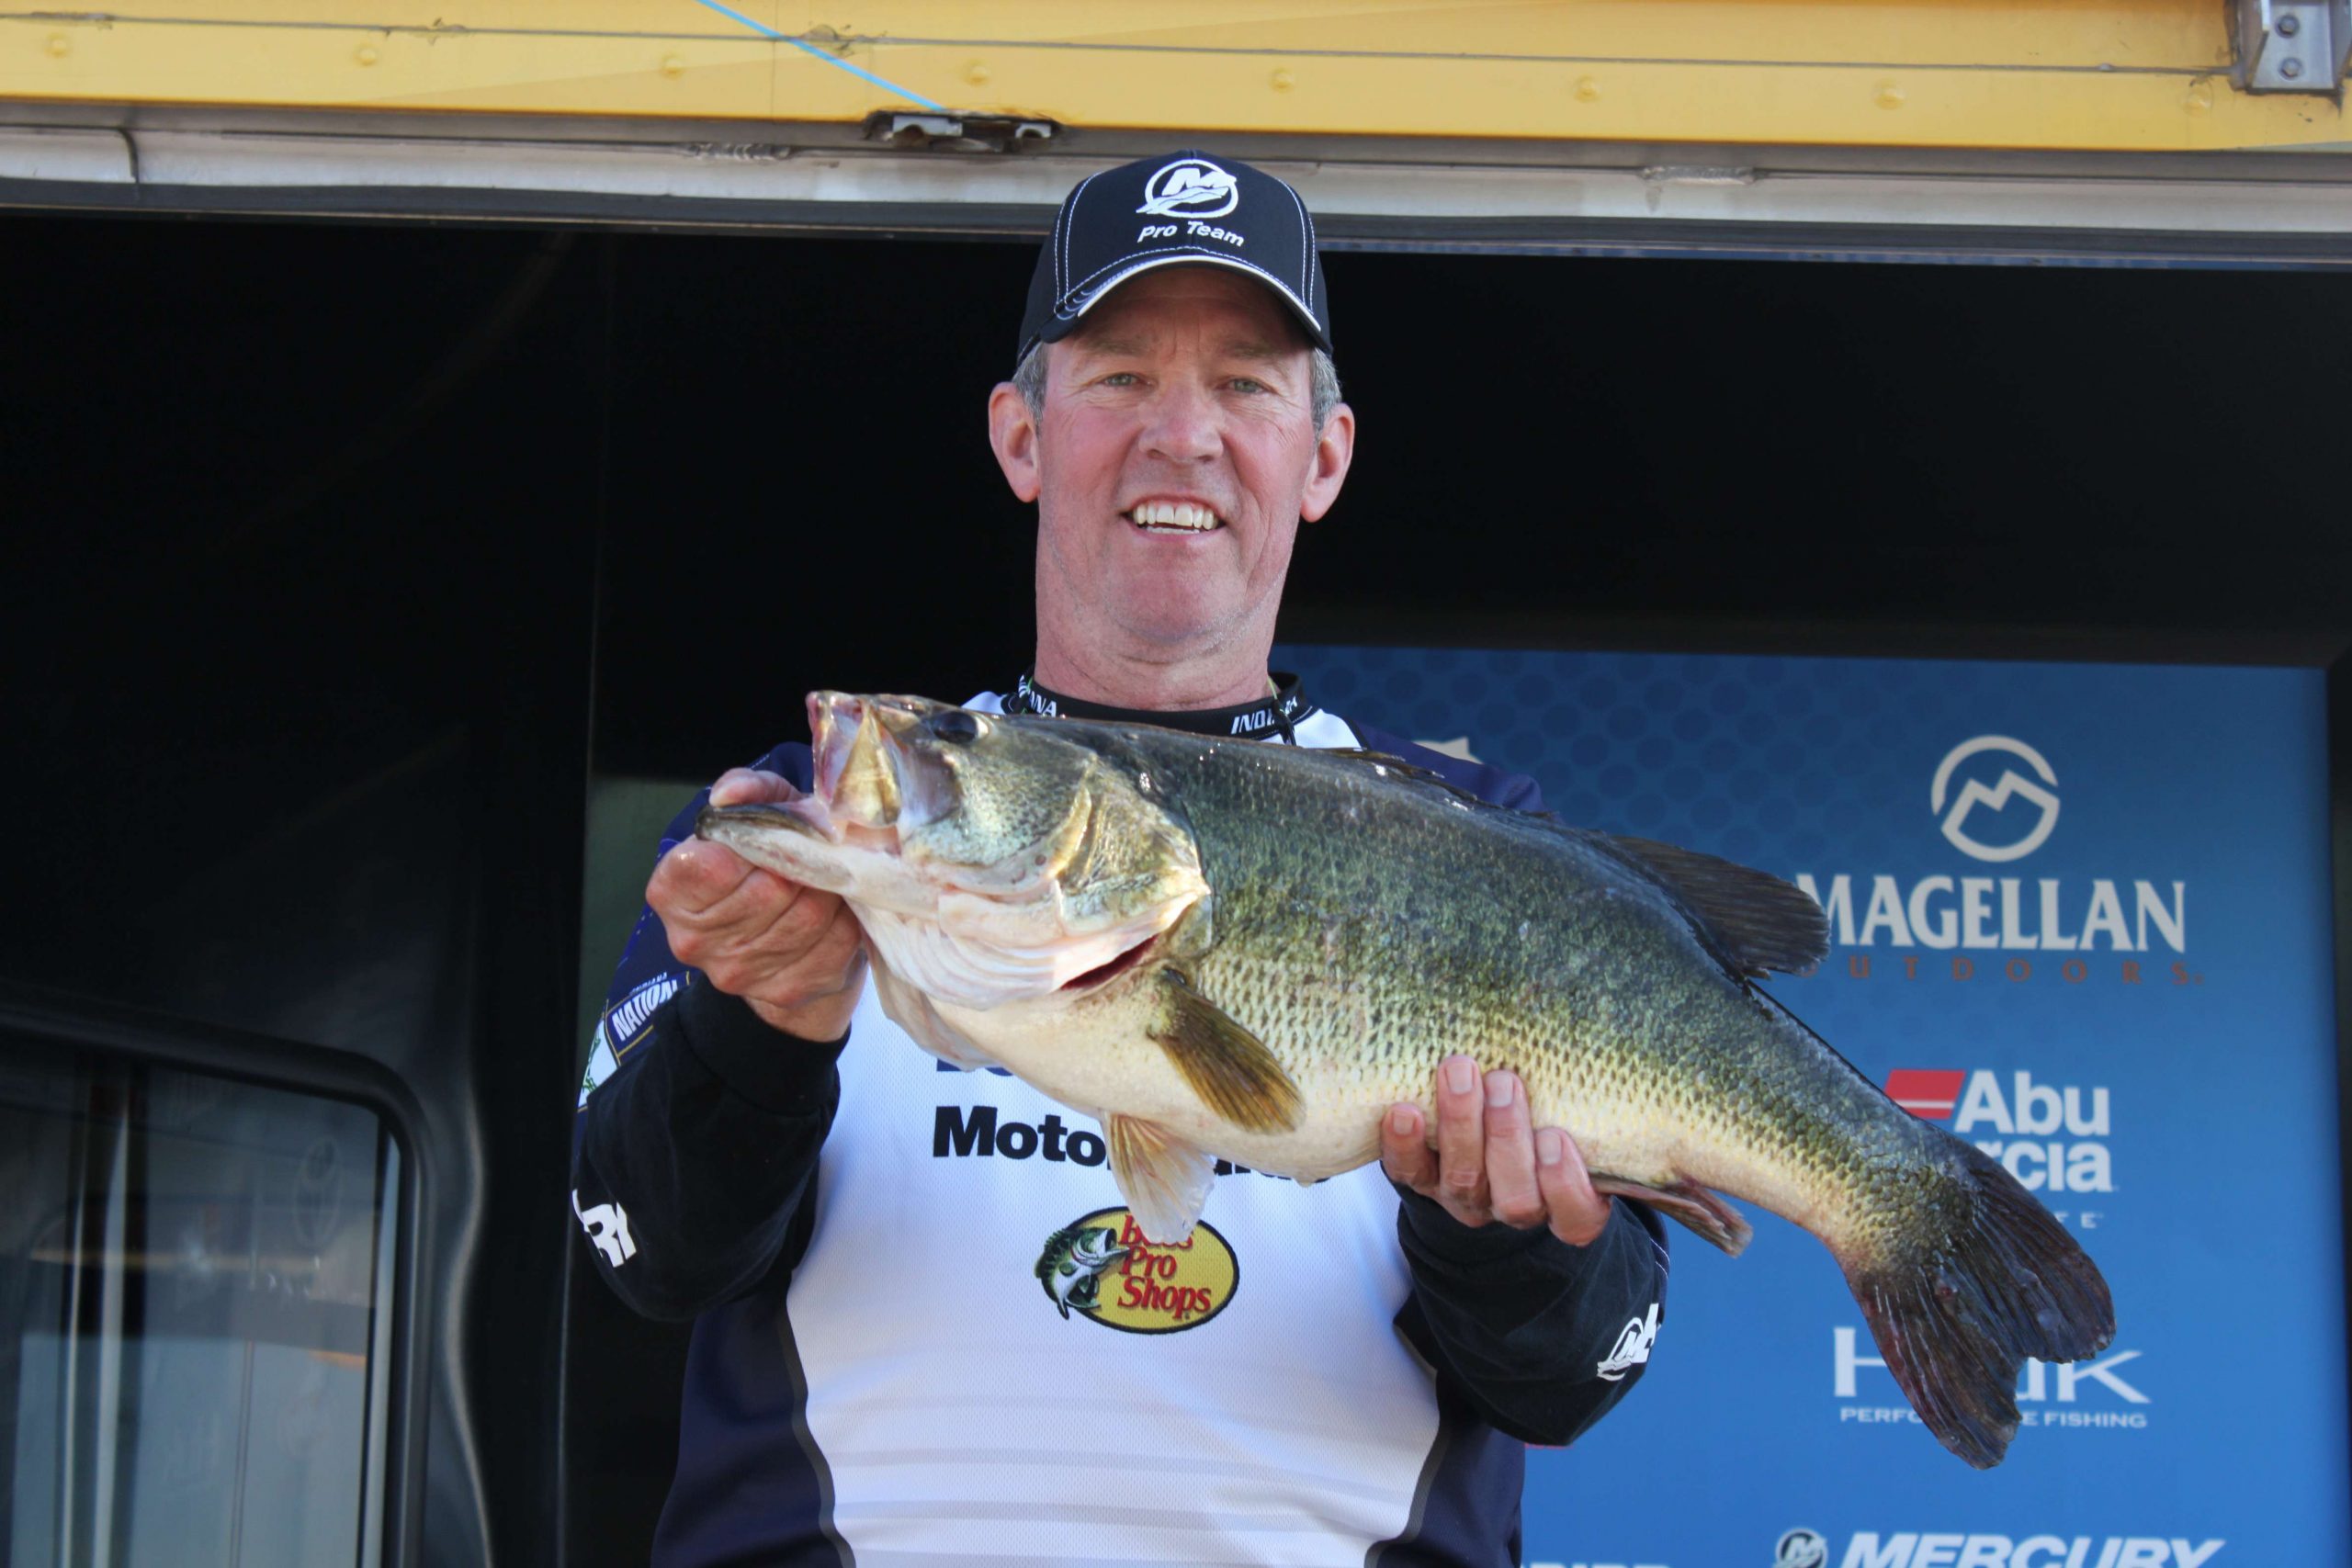 And as awesome as the bass Blumenstein and Vance caught, they couldn't touch this absolute beast caught by Indiana boater Chris Myers. The bass weighed a whopping 11 pounds, 6 ounces, which was a personal best for a guy who's fished bass for 37 years. The lunker helped him to a 23-5 sack on Thursday, and he's in 10th place overall with 32-4.
